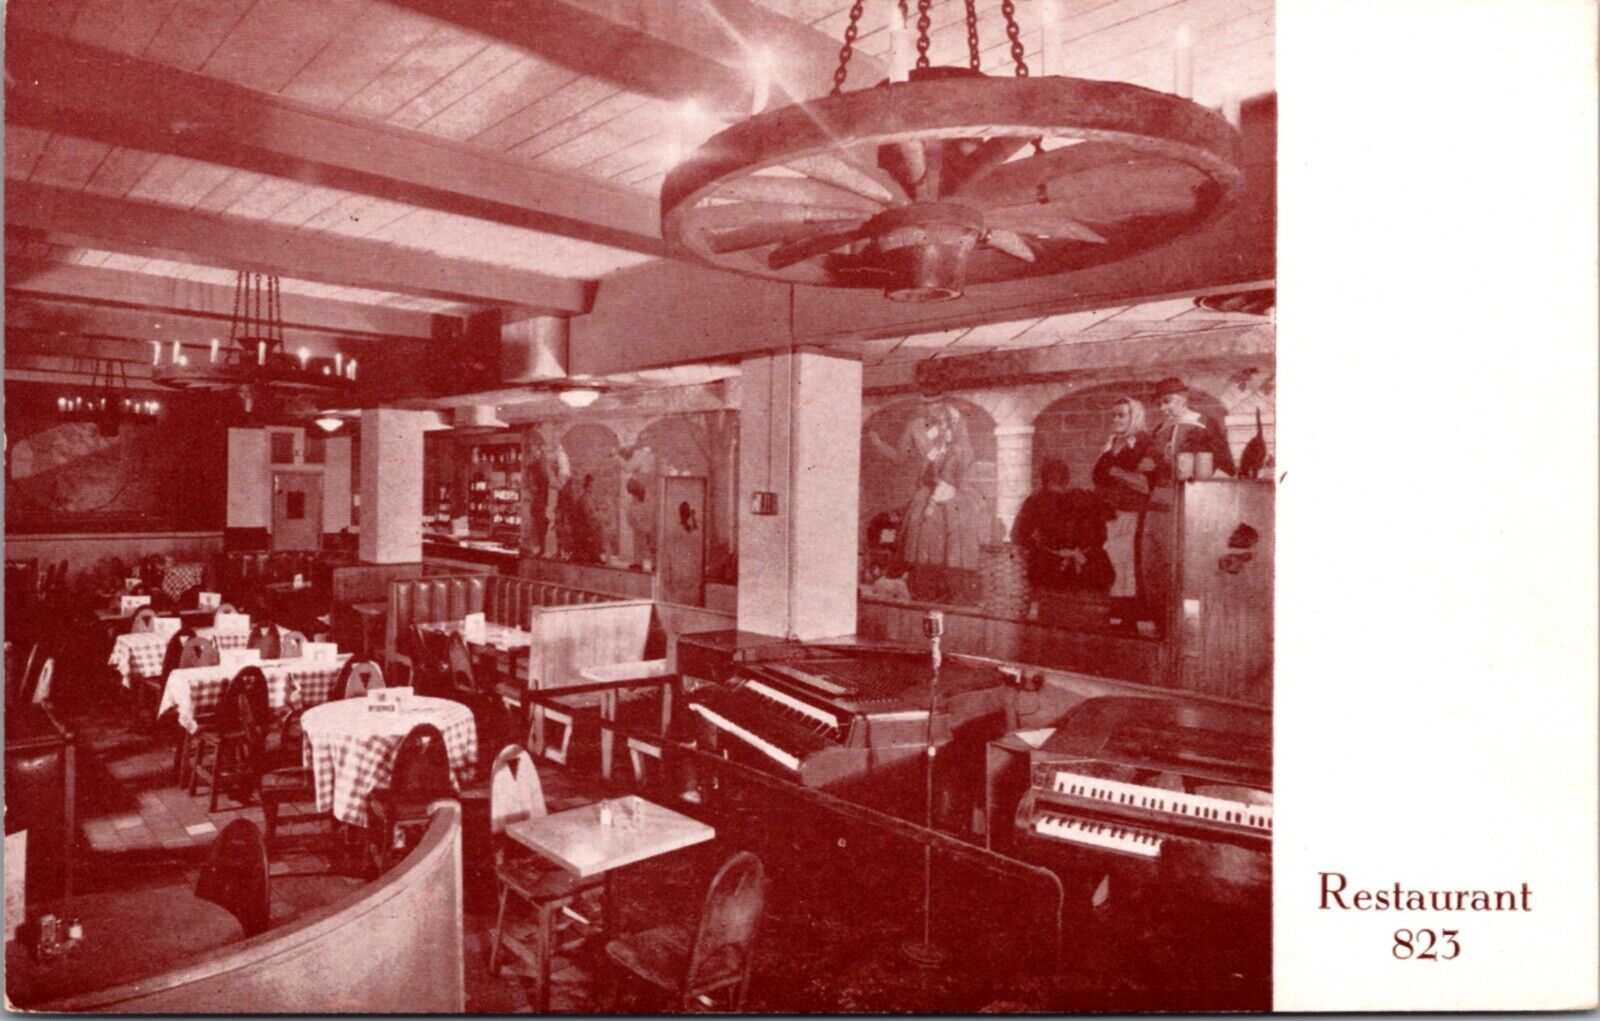 Postcard Interior of Restaurant 823 at Fifteenth St NW in Washington D.C.